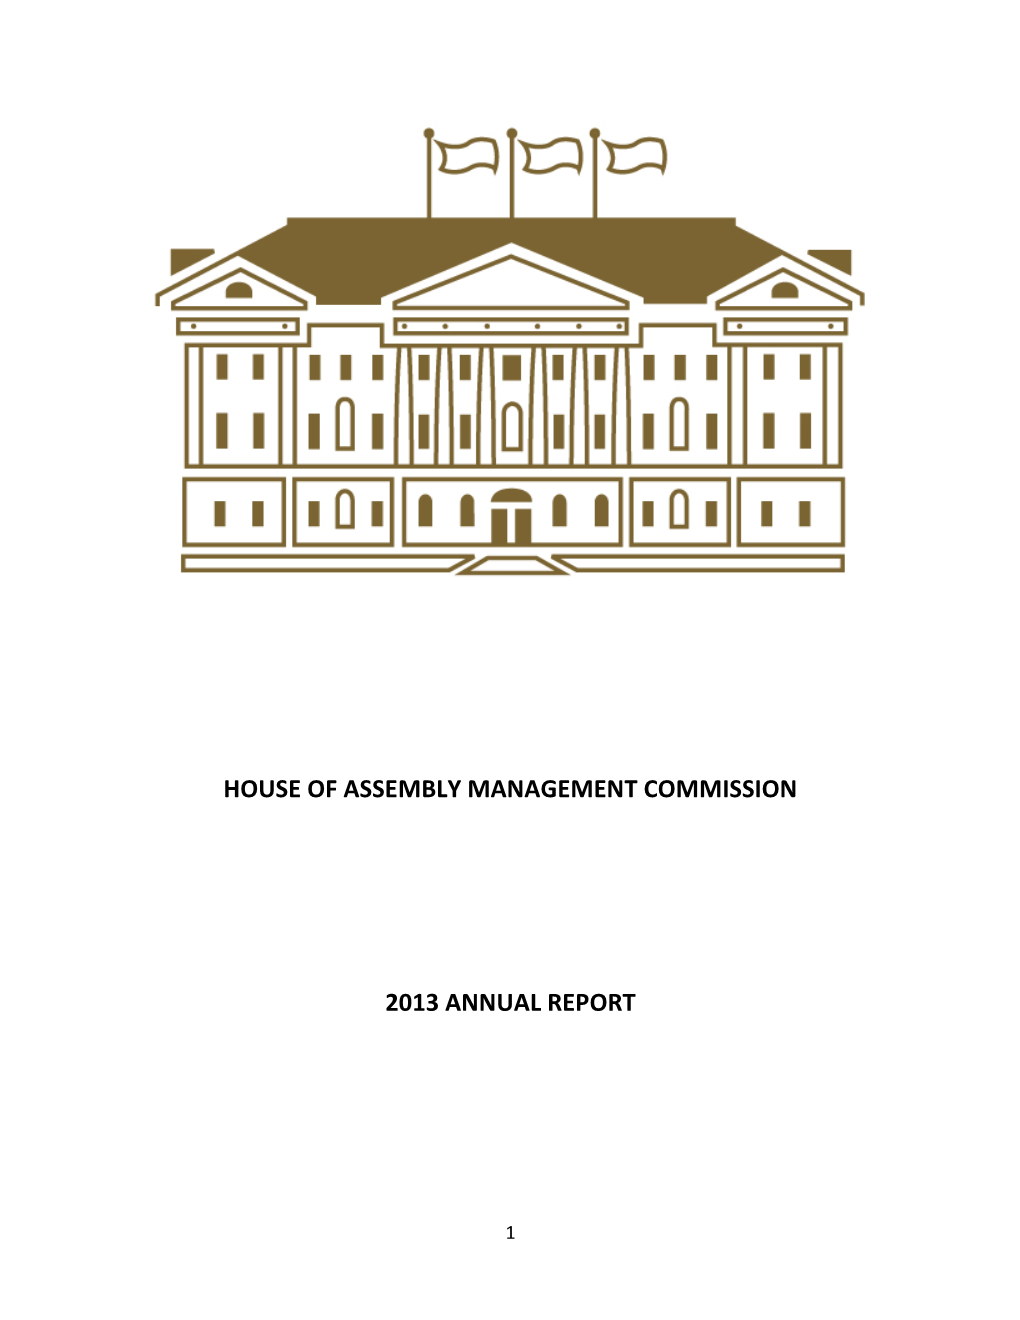 House of Assembly Management Commission 2013 Annual Report